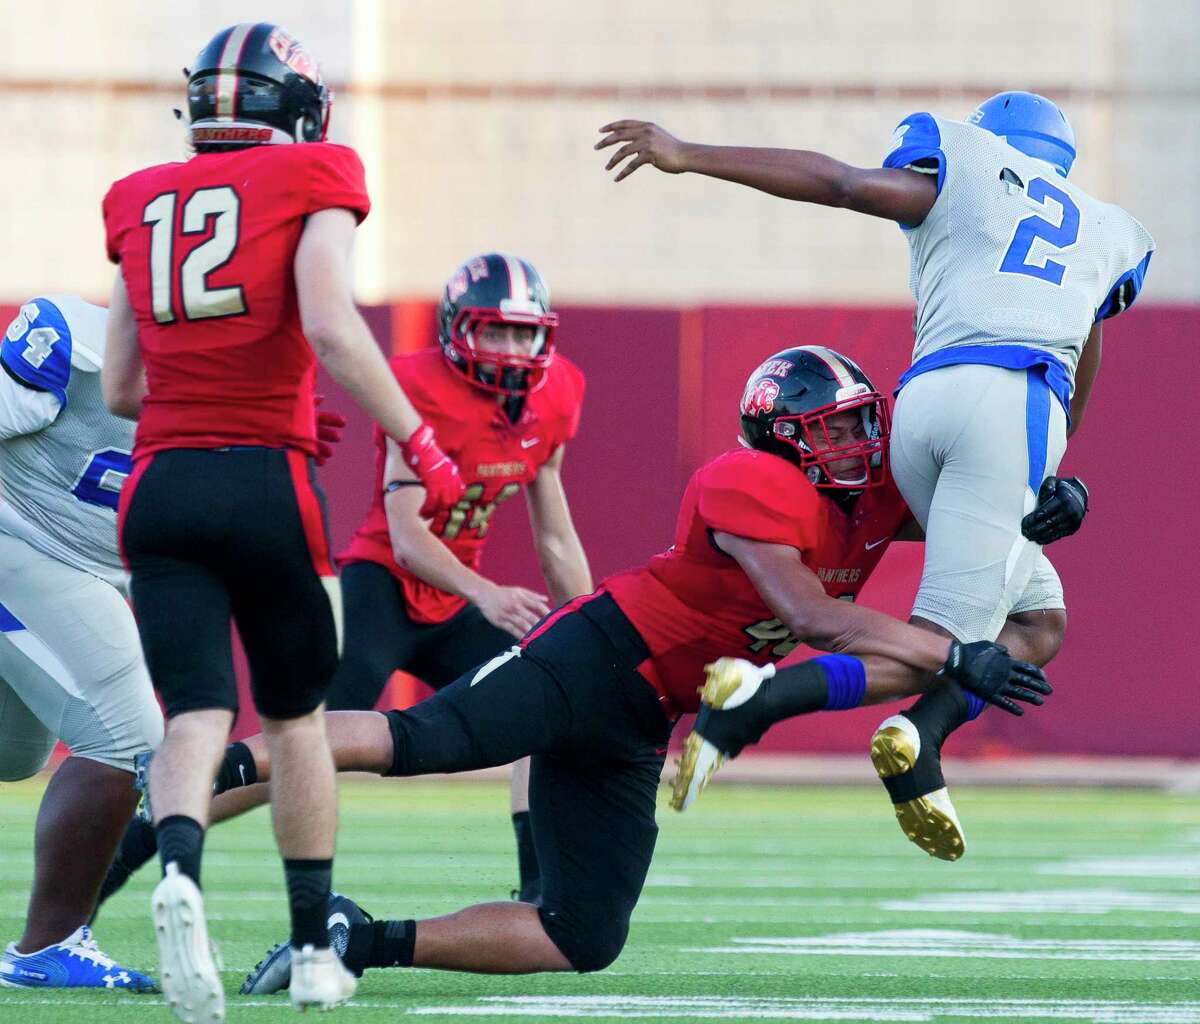 Caney Creek defensive linemen Edgar Heredia (46) tackles Pro-Vision Academy quarterback Trajon Duhart (2) in midair during the first quarter of a non-district high school football game at Woodforest Bank Stadium, Thursday, Sept. 5, 2019, in Shenandoah.